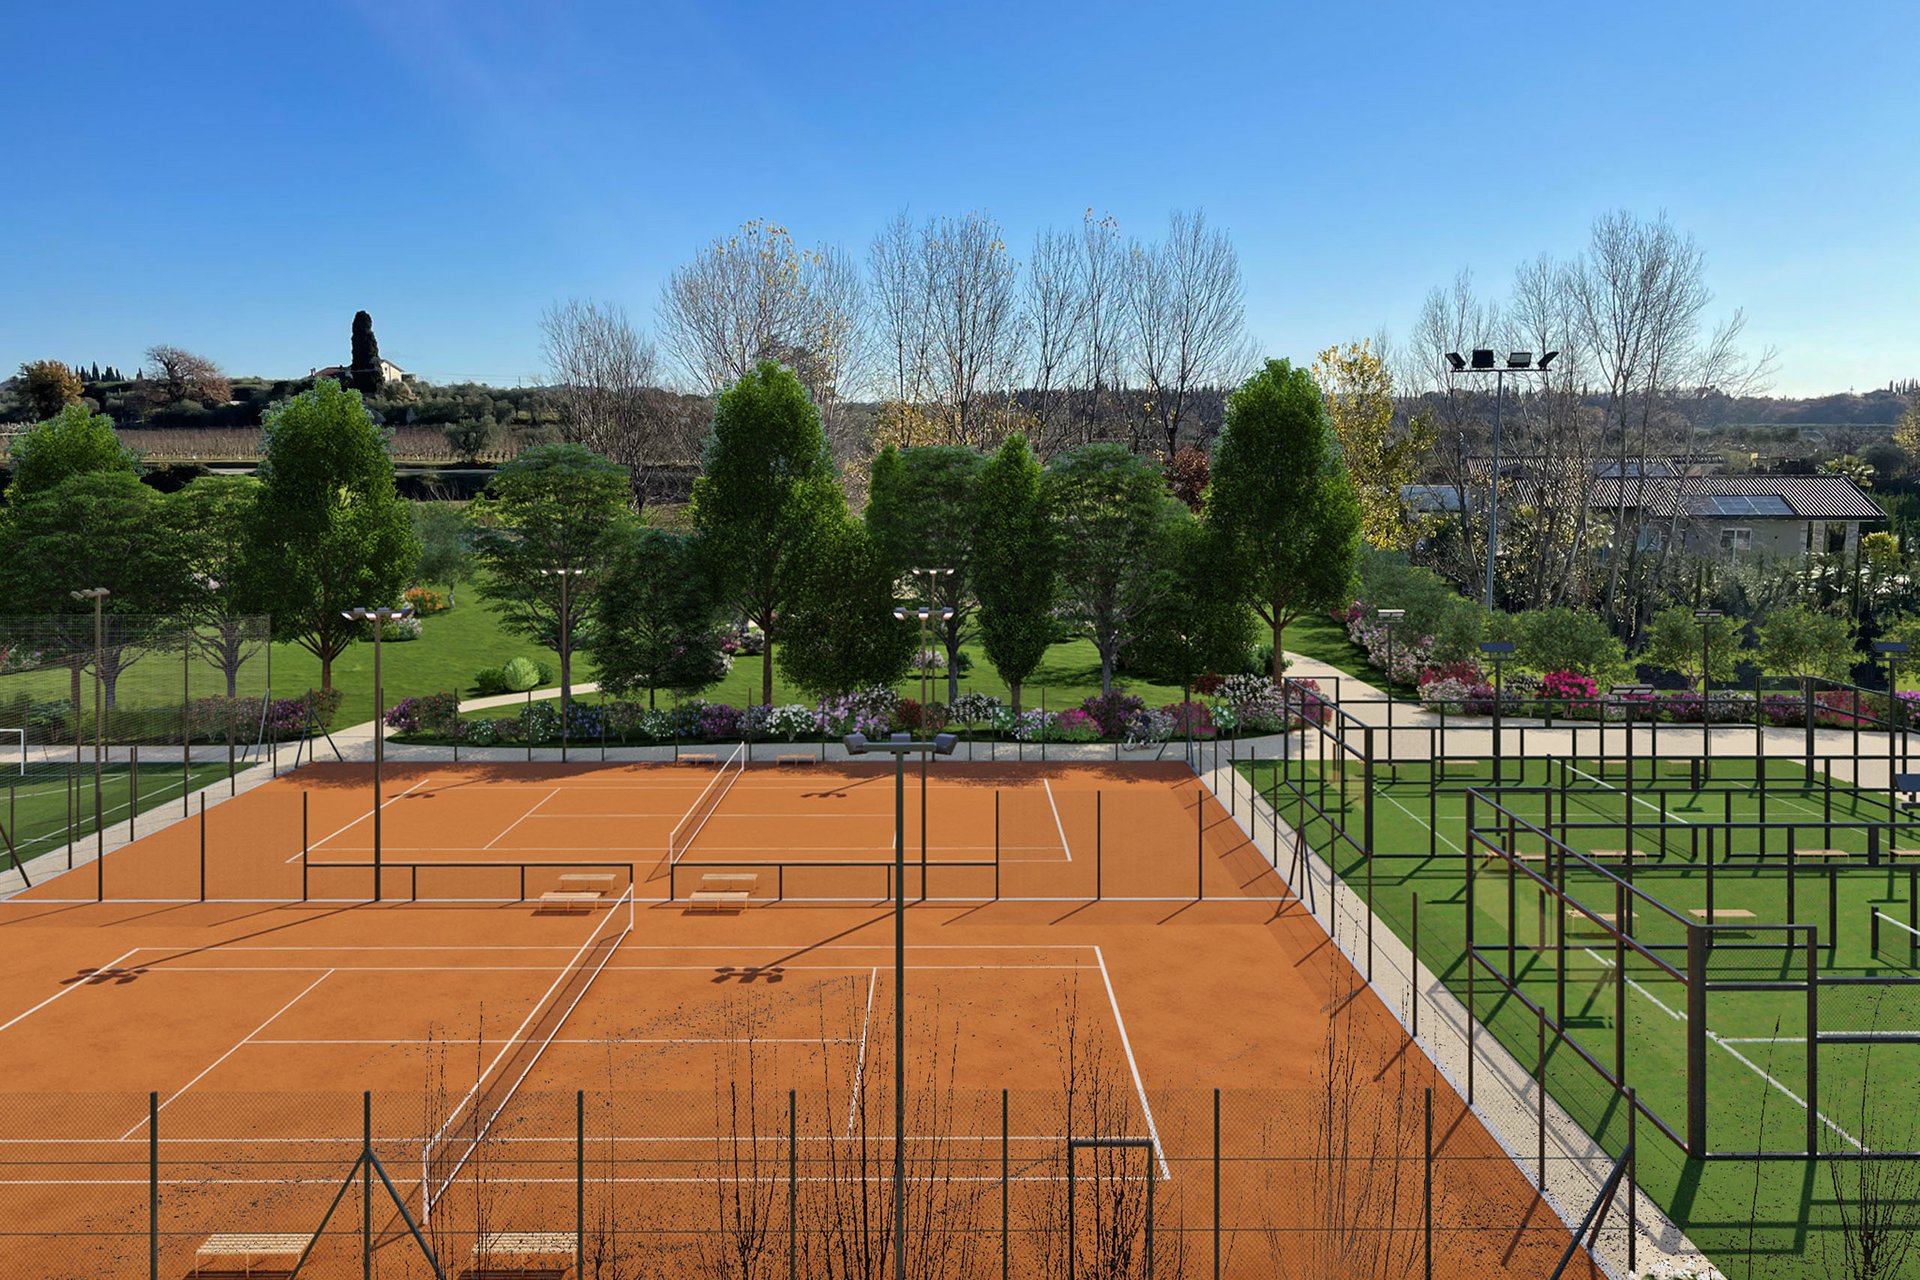 Welcome to the 5-star hotel with tennis court at Lake Garda